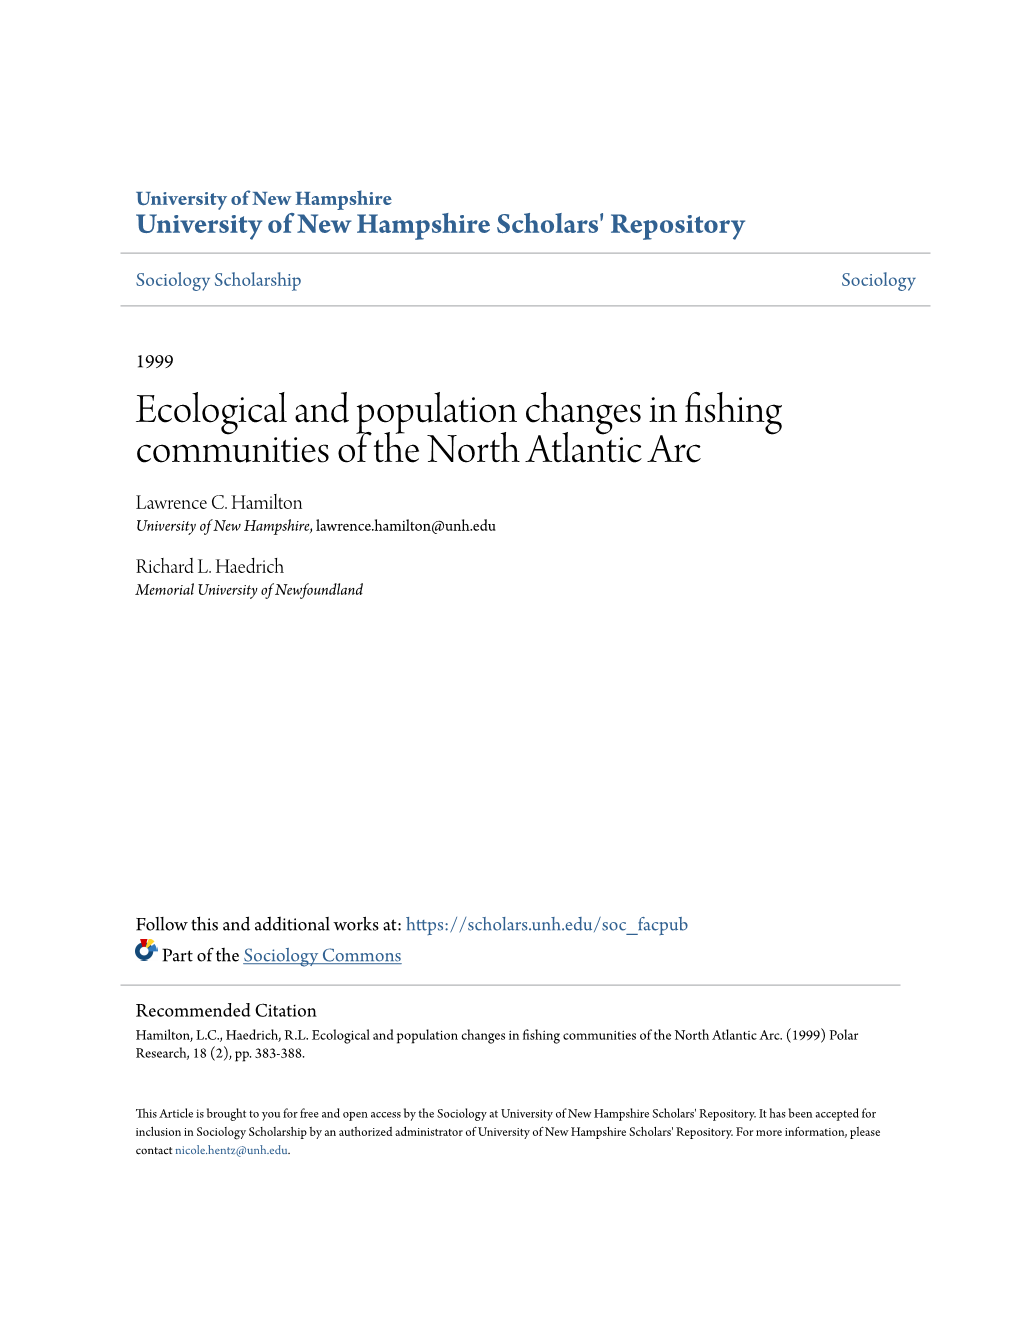 Ecological and Population Changes in Fishing Communities of the North Atlantic Arc Lawrence C